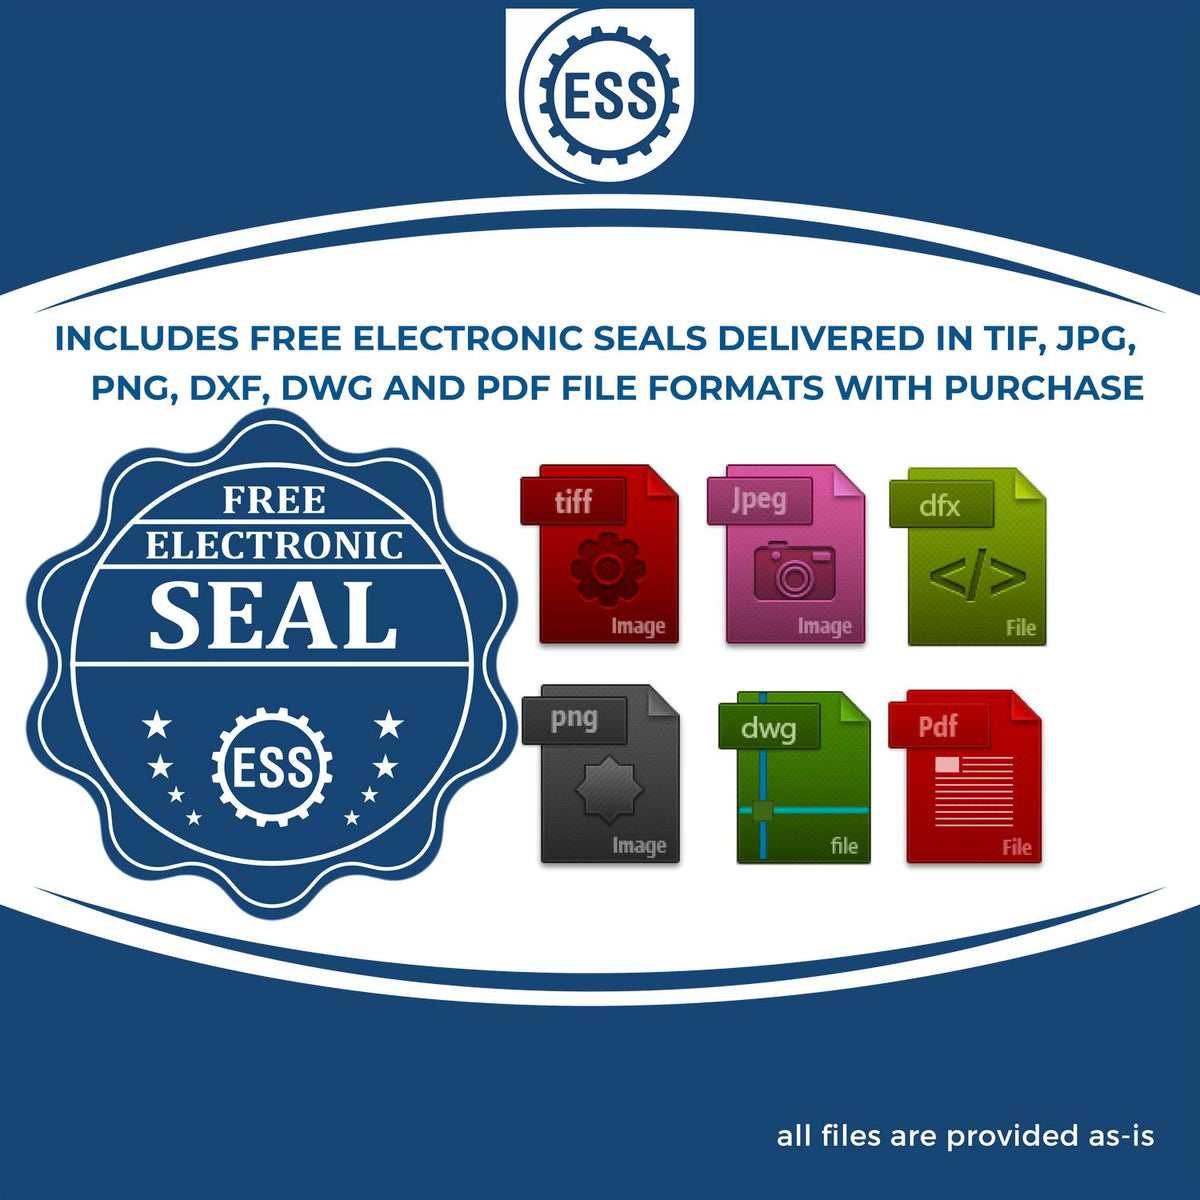 An infographic for the free electronic seal for the Heavy Duty Cast Iron Maryland Land Surveyor Seal Embosser illustrating the different file type icons such as DXF, DWG, TIF, JPG and PNG.